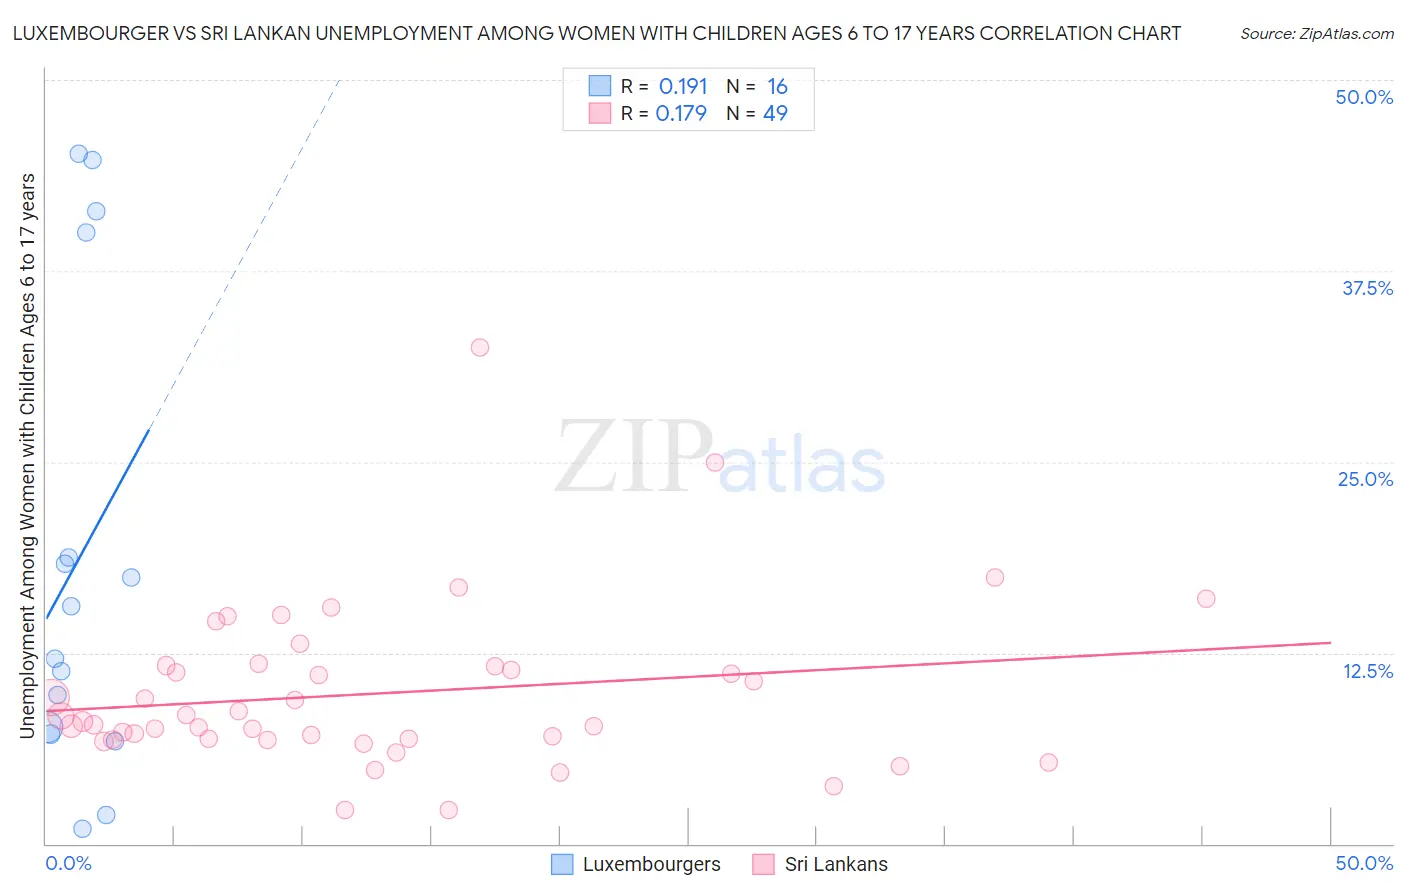 Luxembourger vs Sri Lankan Unemployment Among Women with Children Ages 6 to 17 years